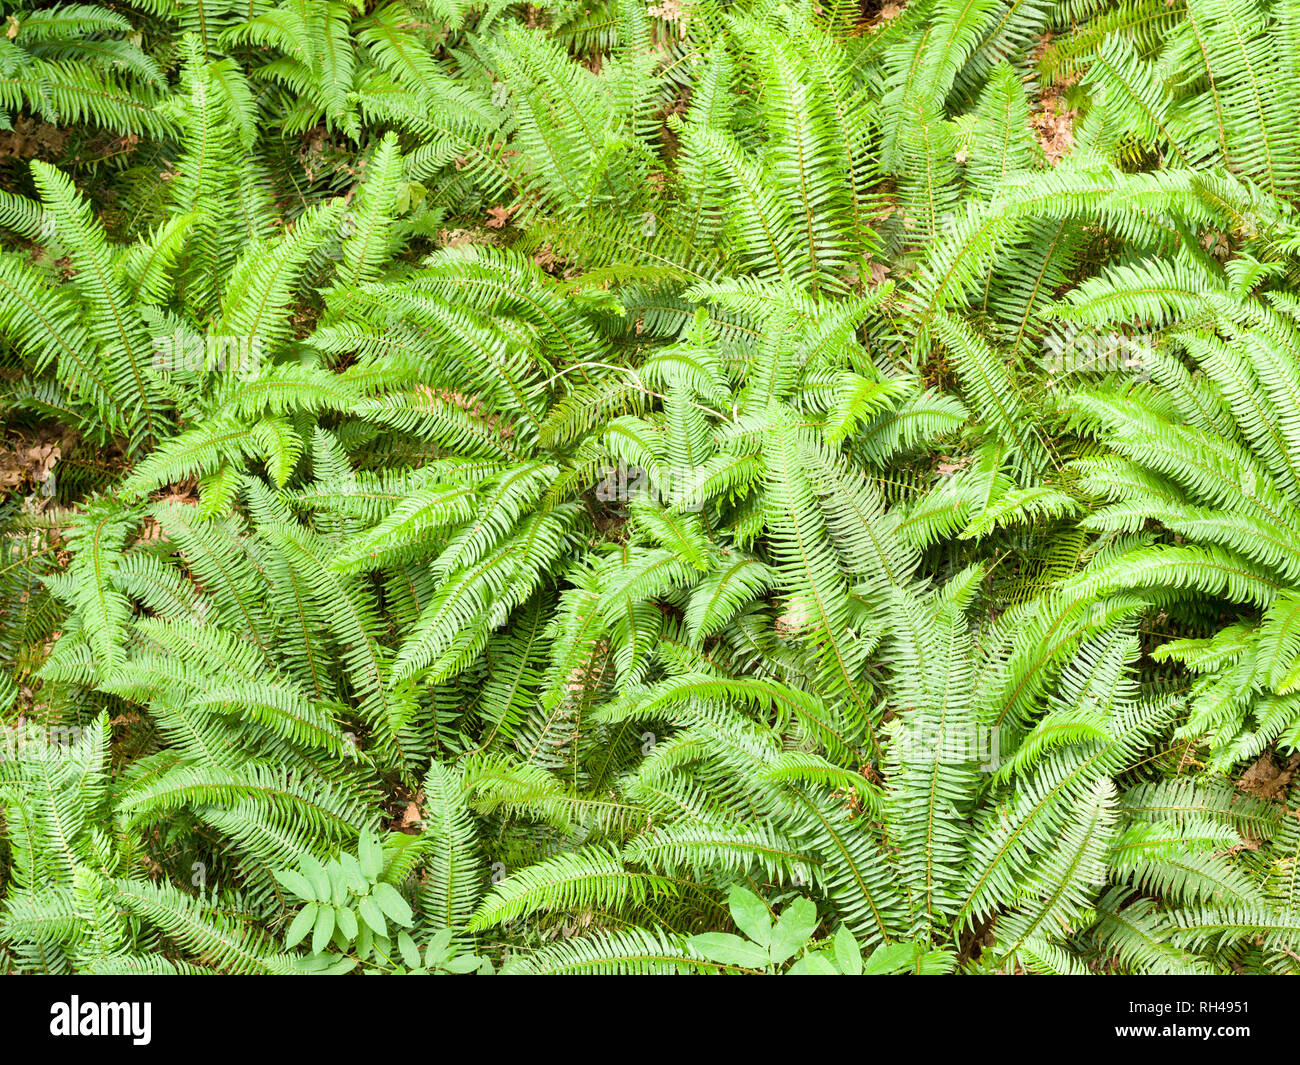 Forest Floor Ferns: A cluster of bright green ferns and other understory plants in a temperate coastal rain forest. Stock Photo